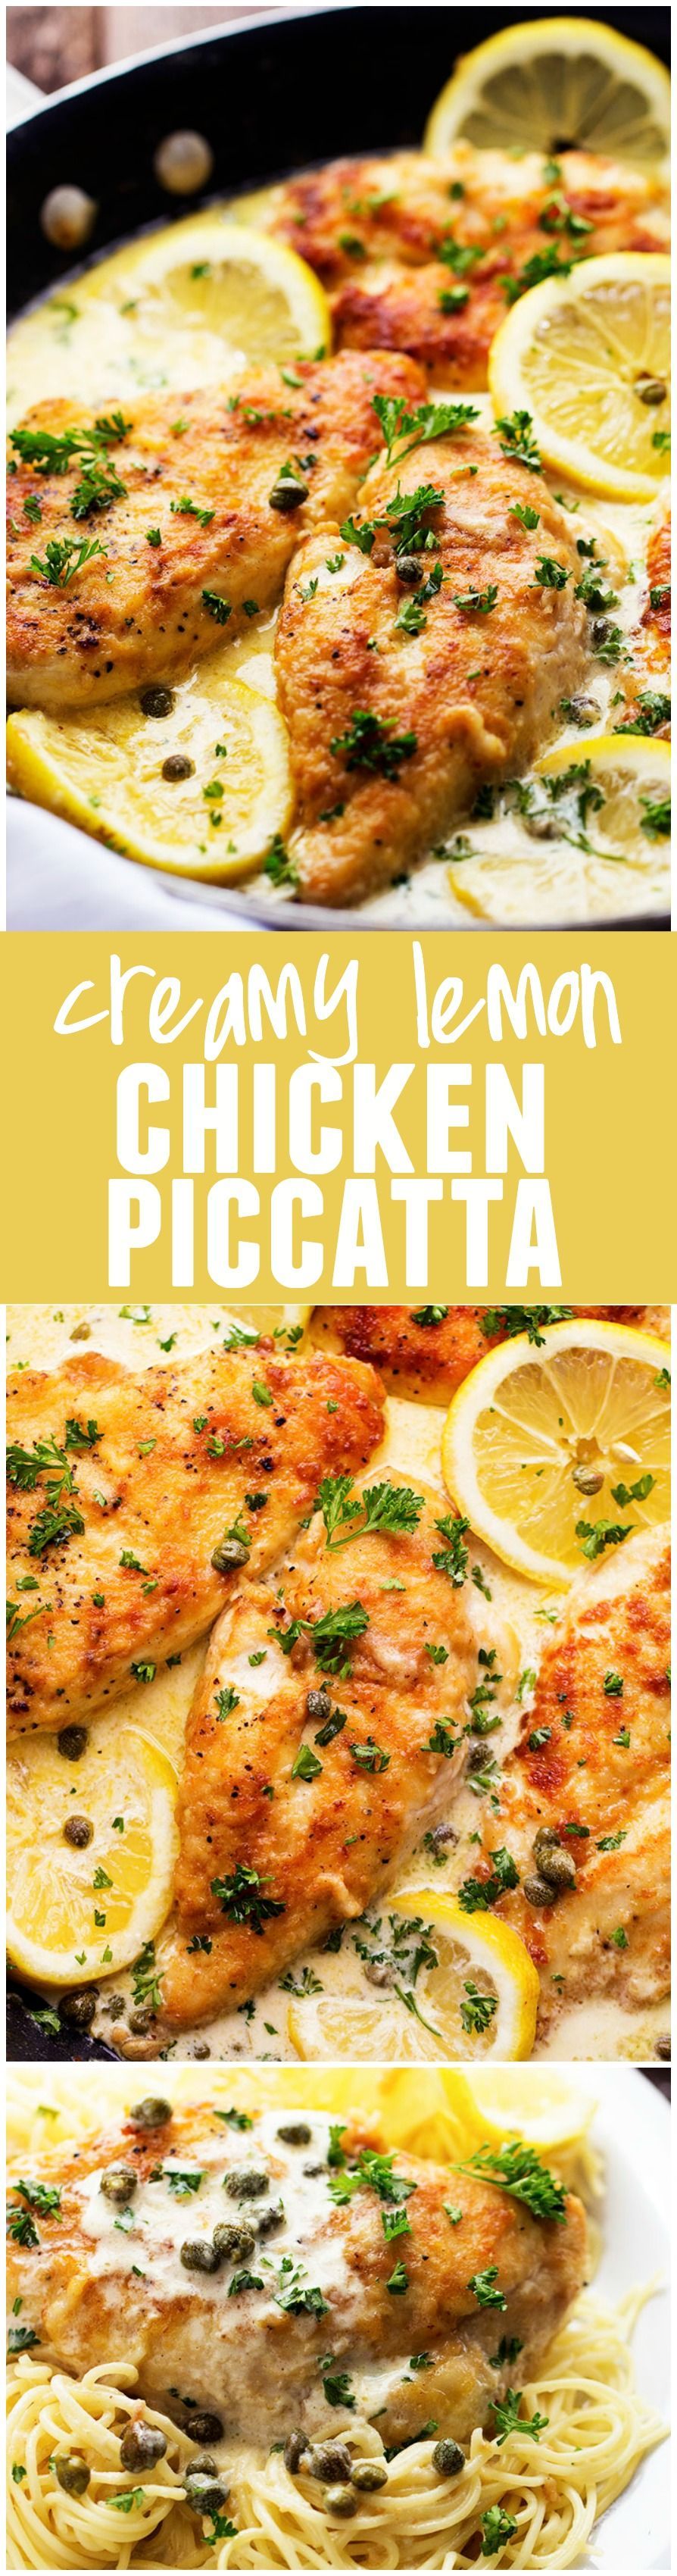 This Creamy Lemon Chicken Piccatta is an amazing one pot meal that is on the dinner table in 30 minutes!